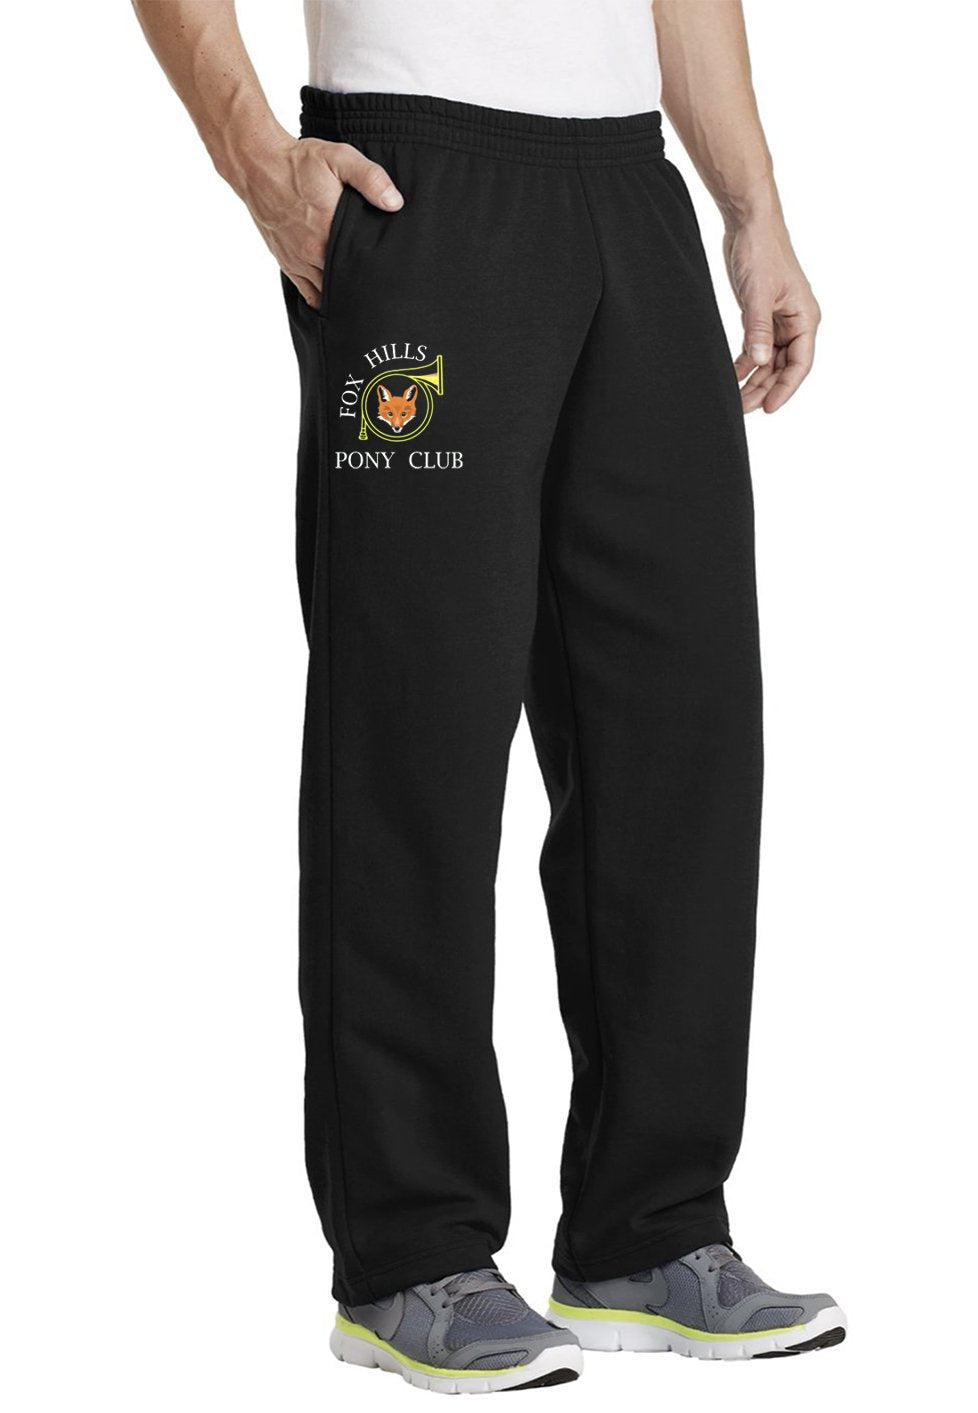 Fox Hills Pony Club Core Fleece Sweatpant with Pockets - Adult Unisex + Youth Sizes